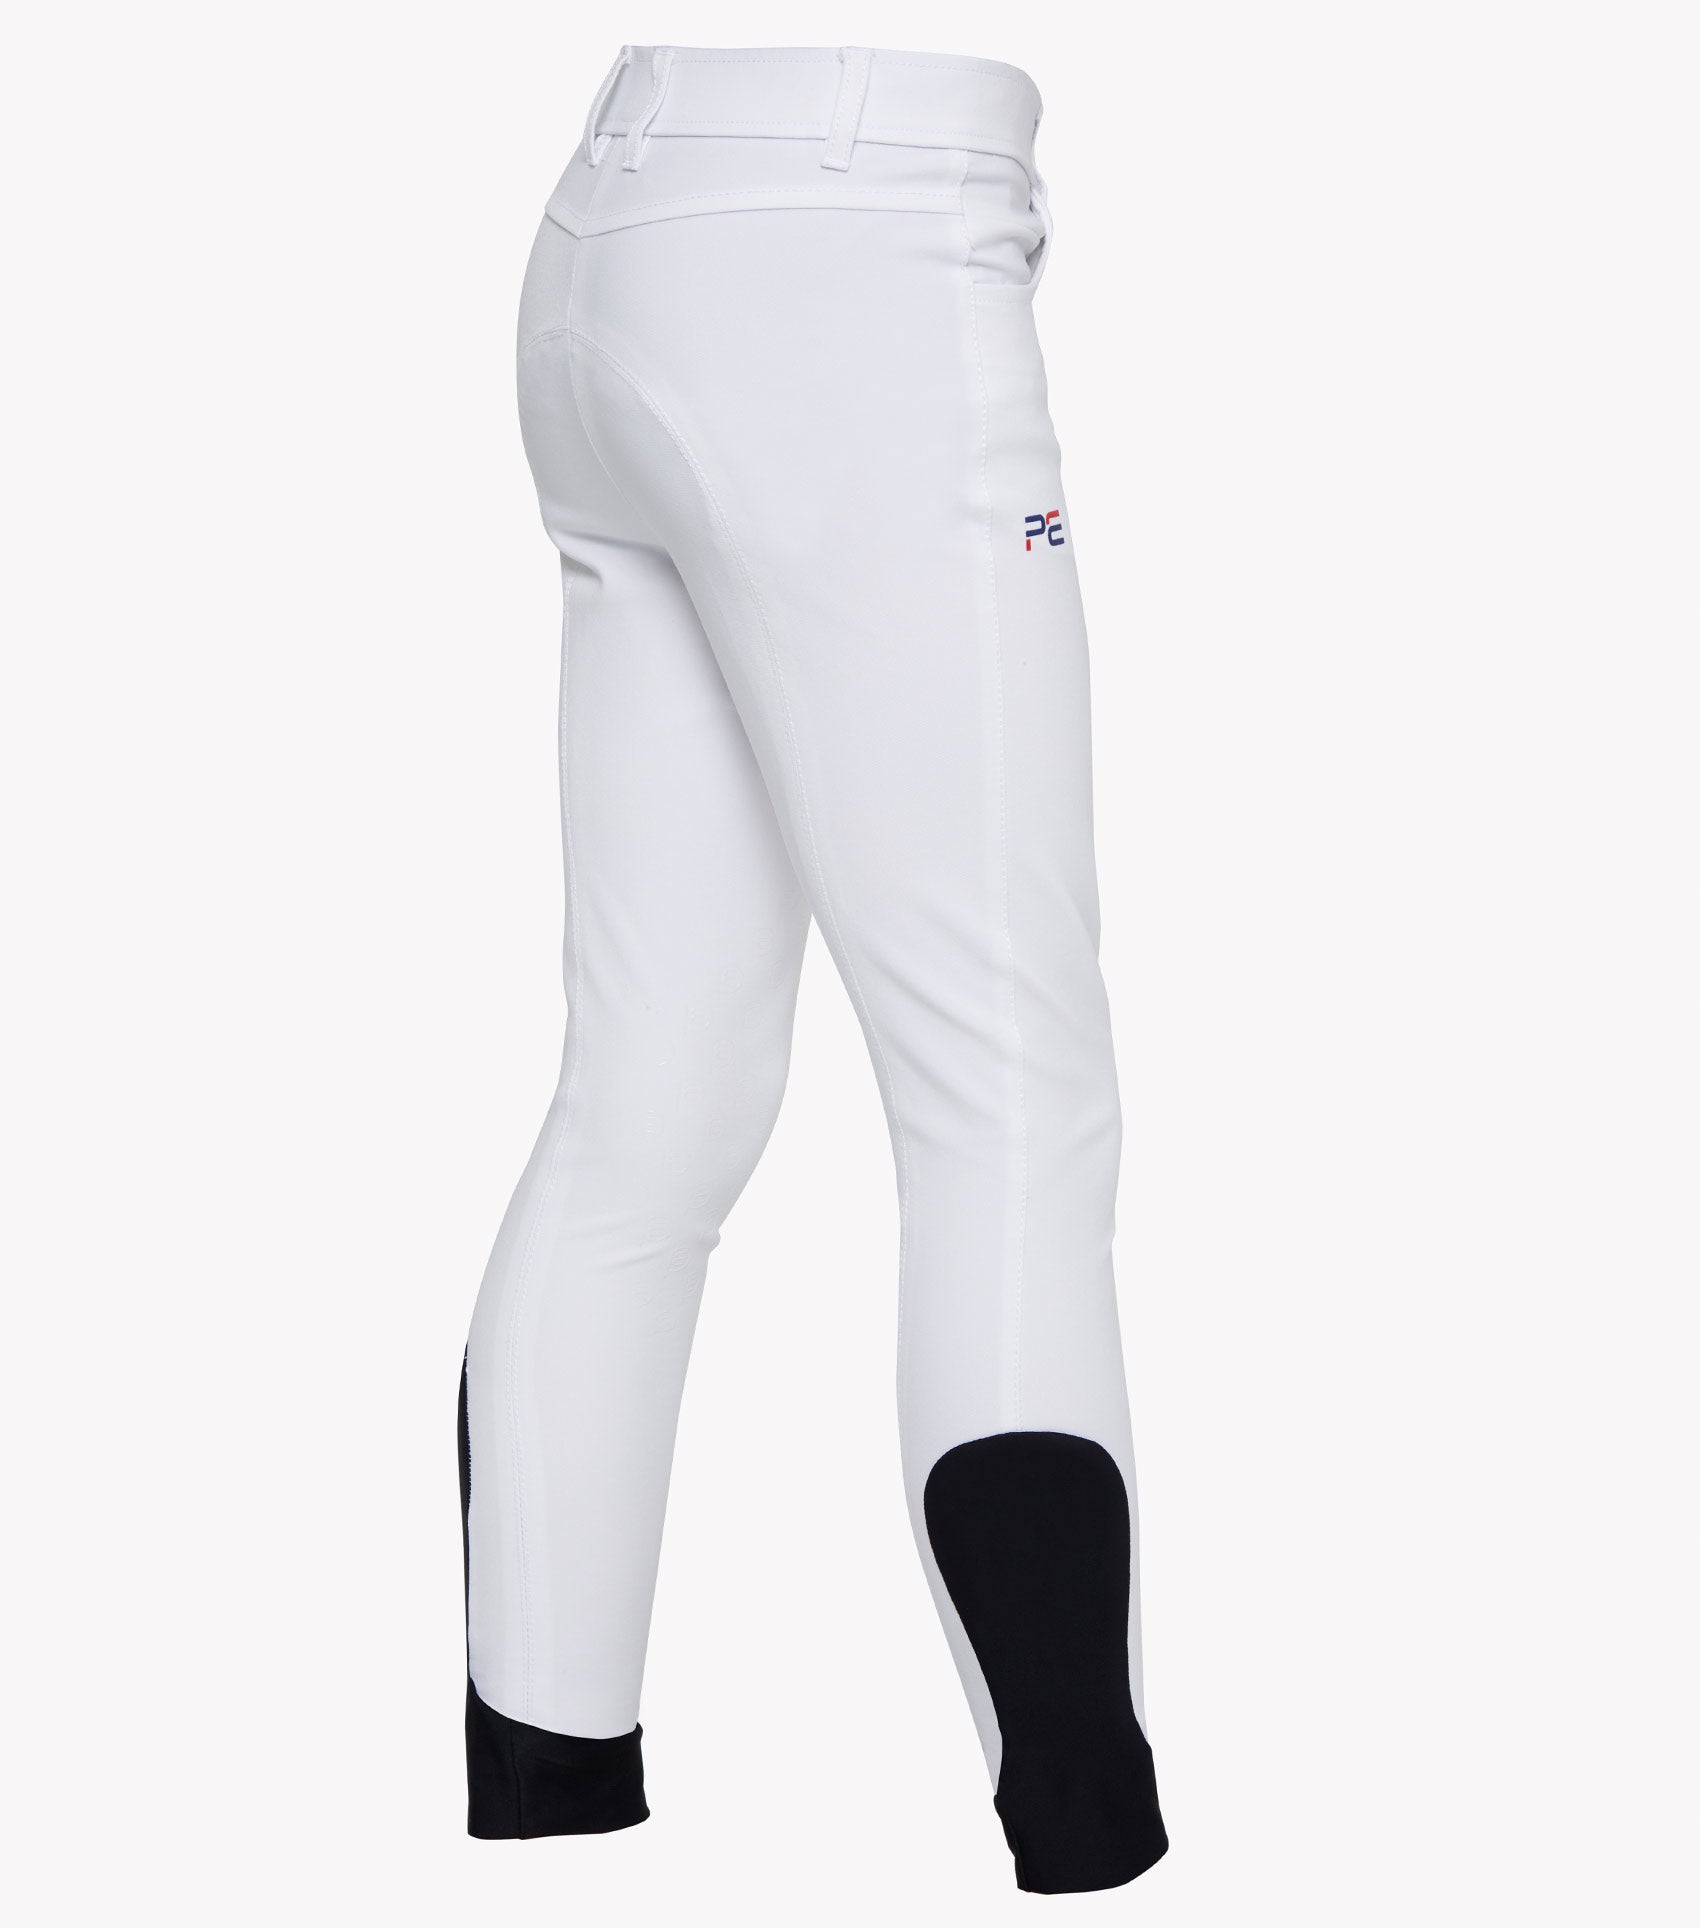 Premier Equine Boys Derby Competition Riding Breeches